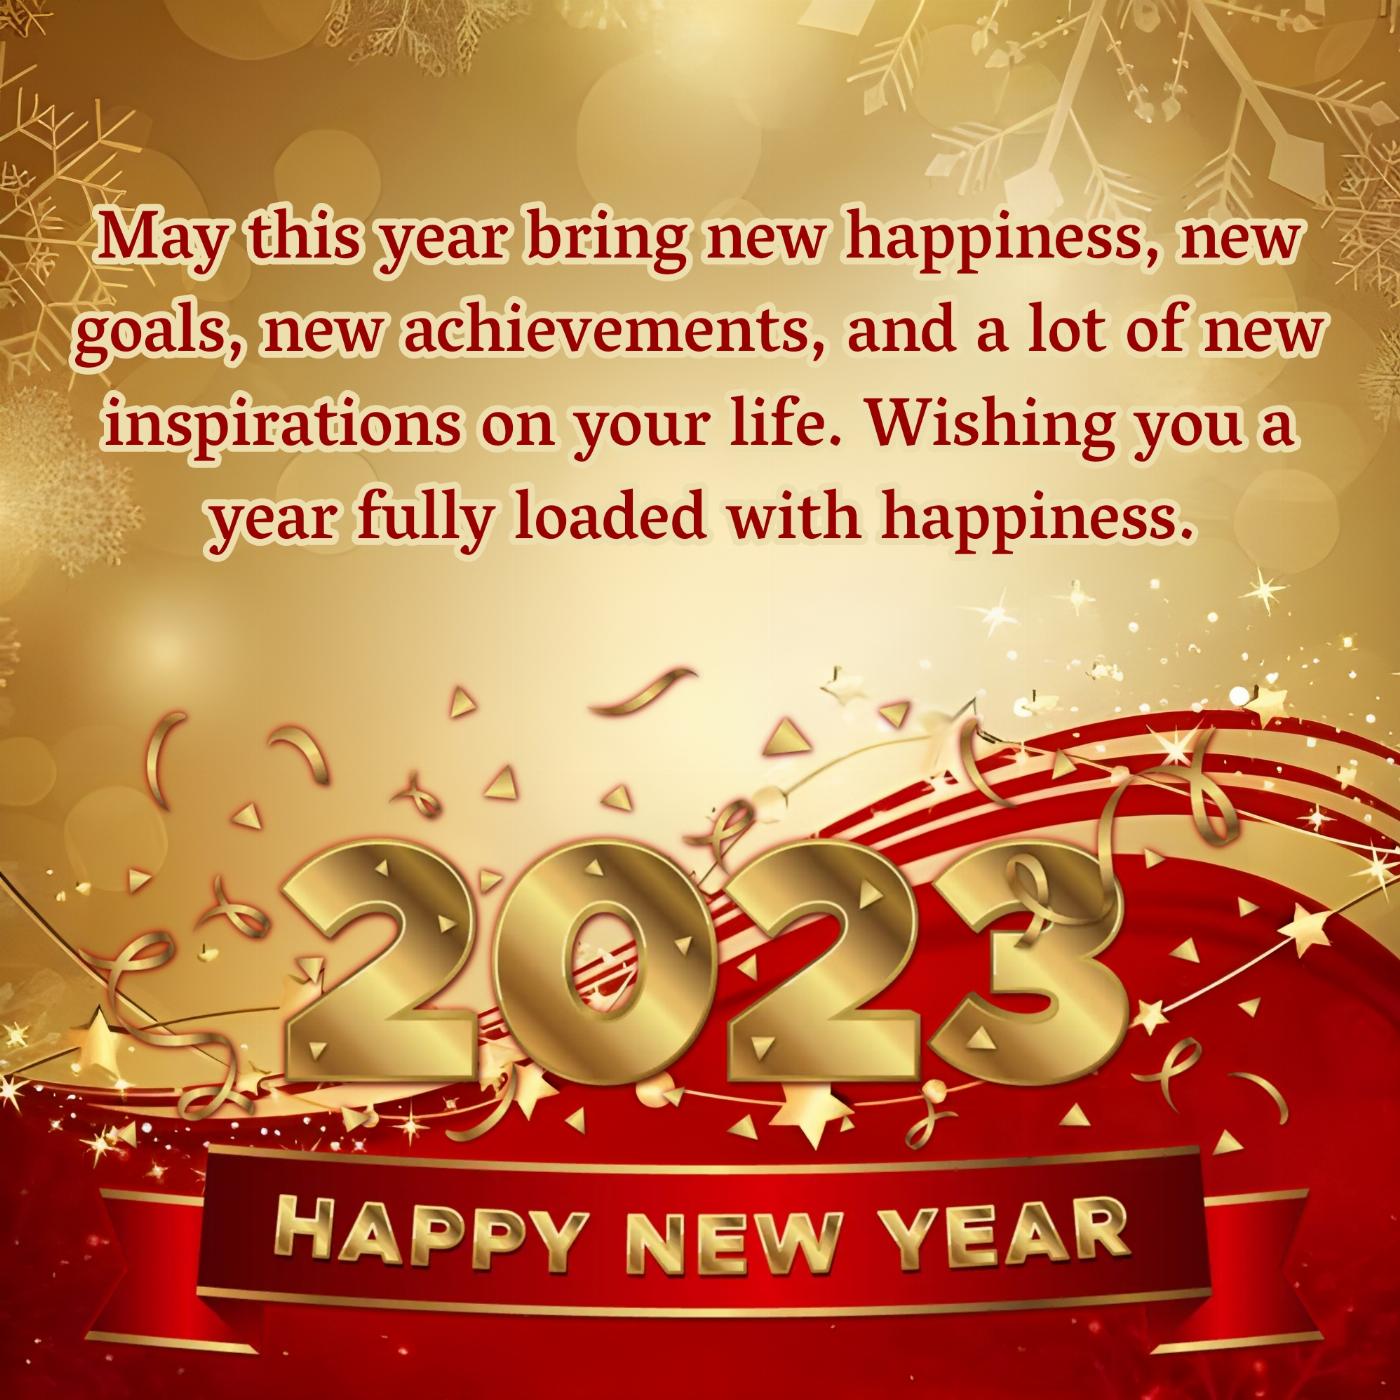 May this year bring new happiness new goals new achievements